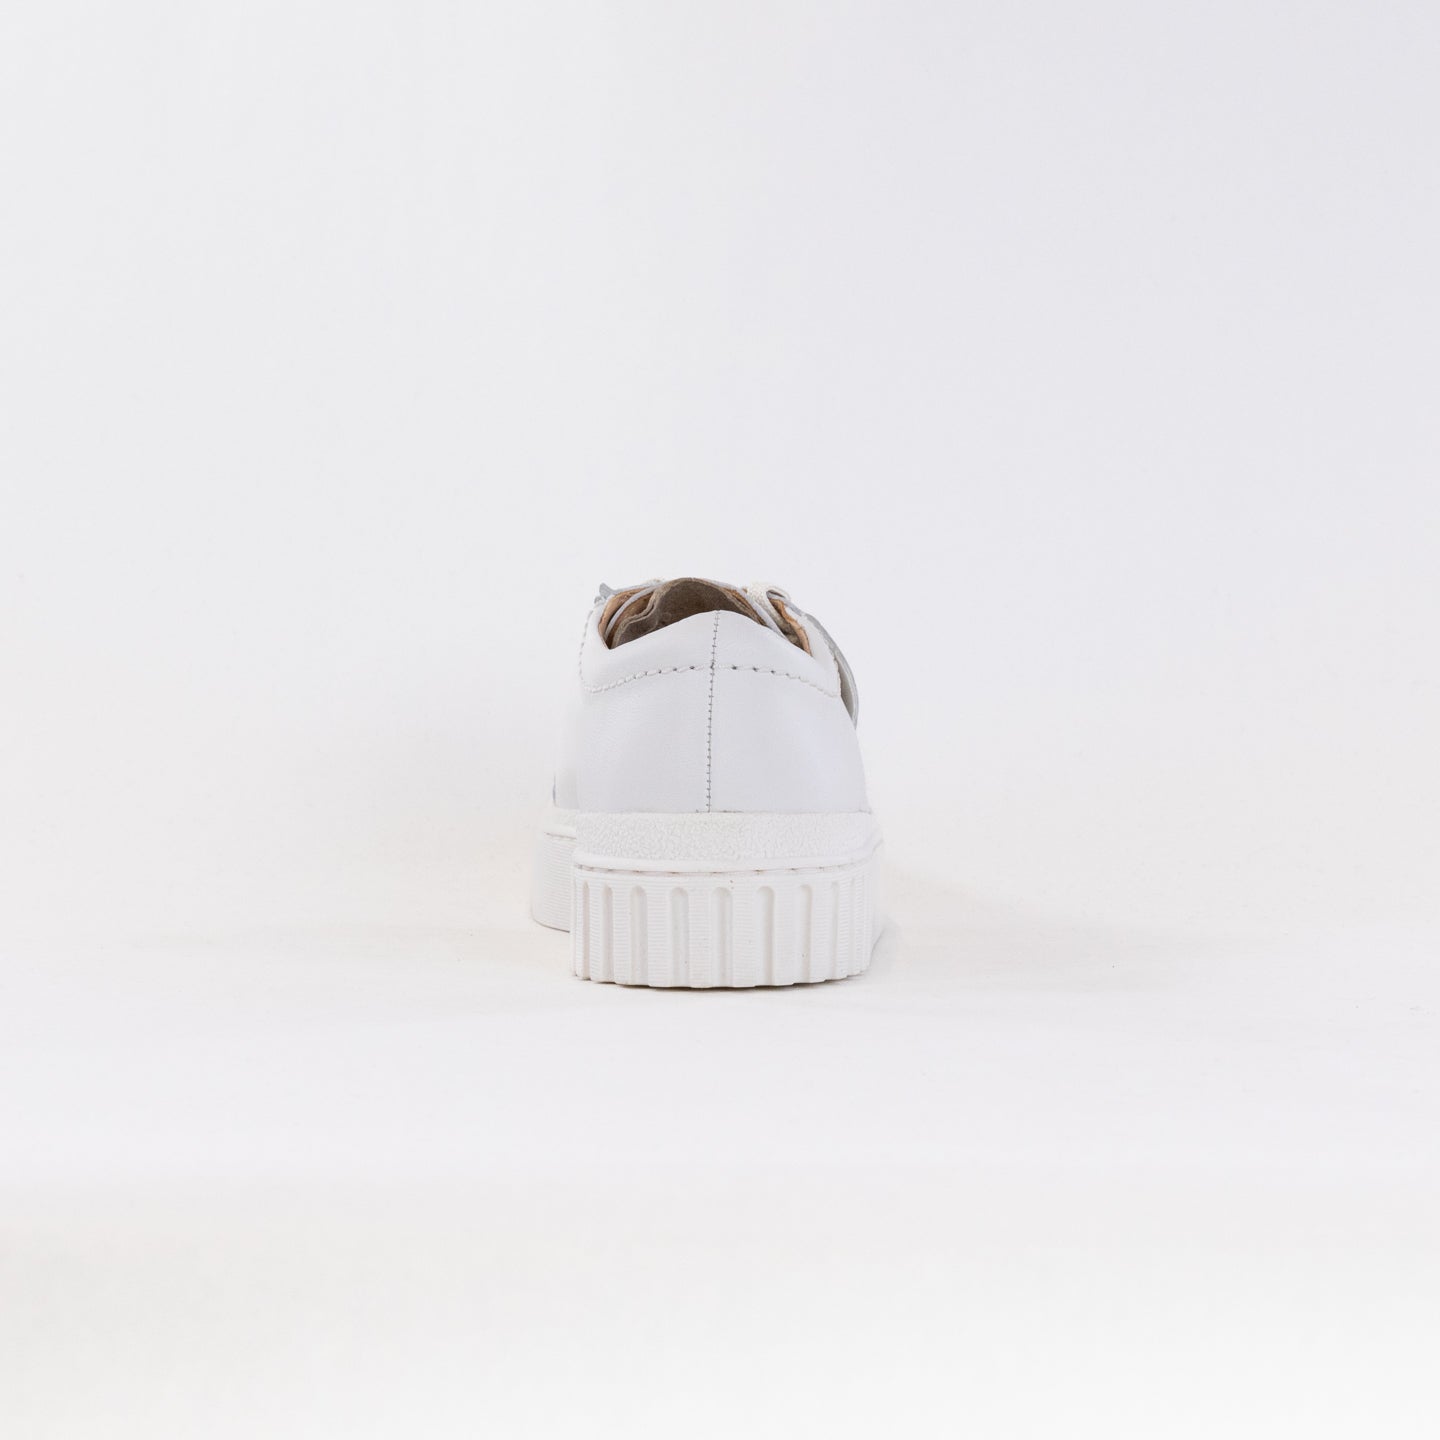 Clarks Mayhill Walk (Women's) - Off White Leather